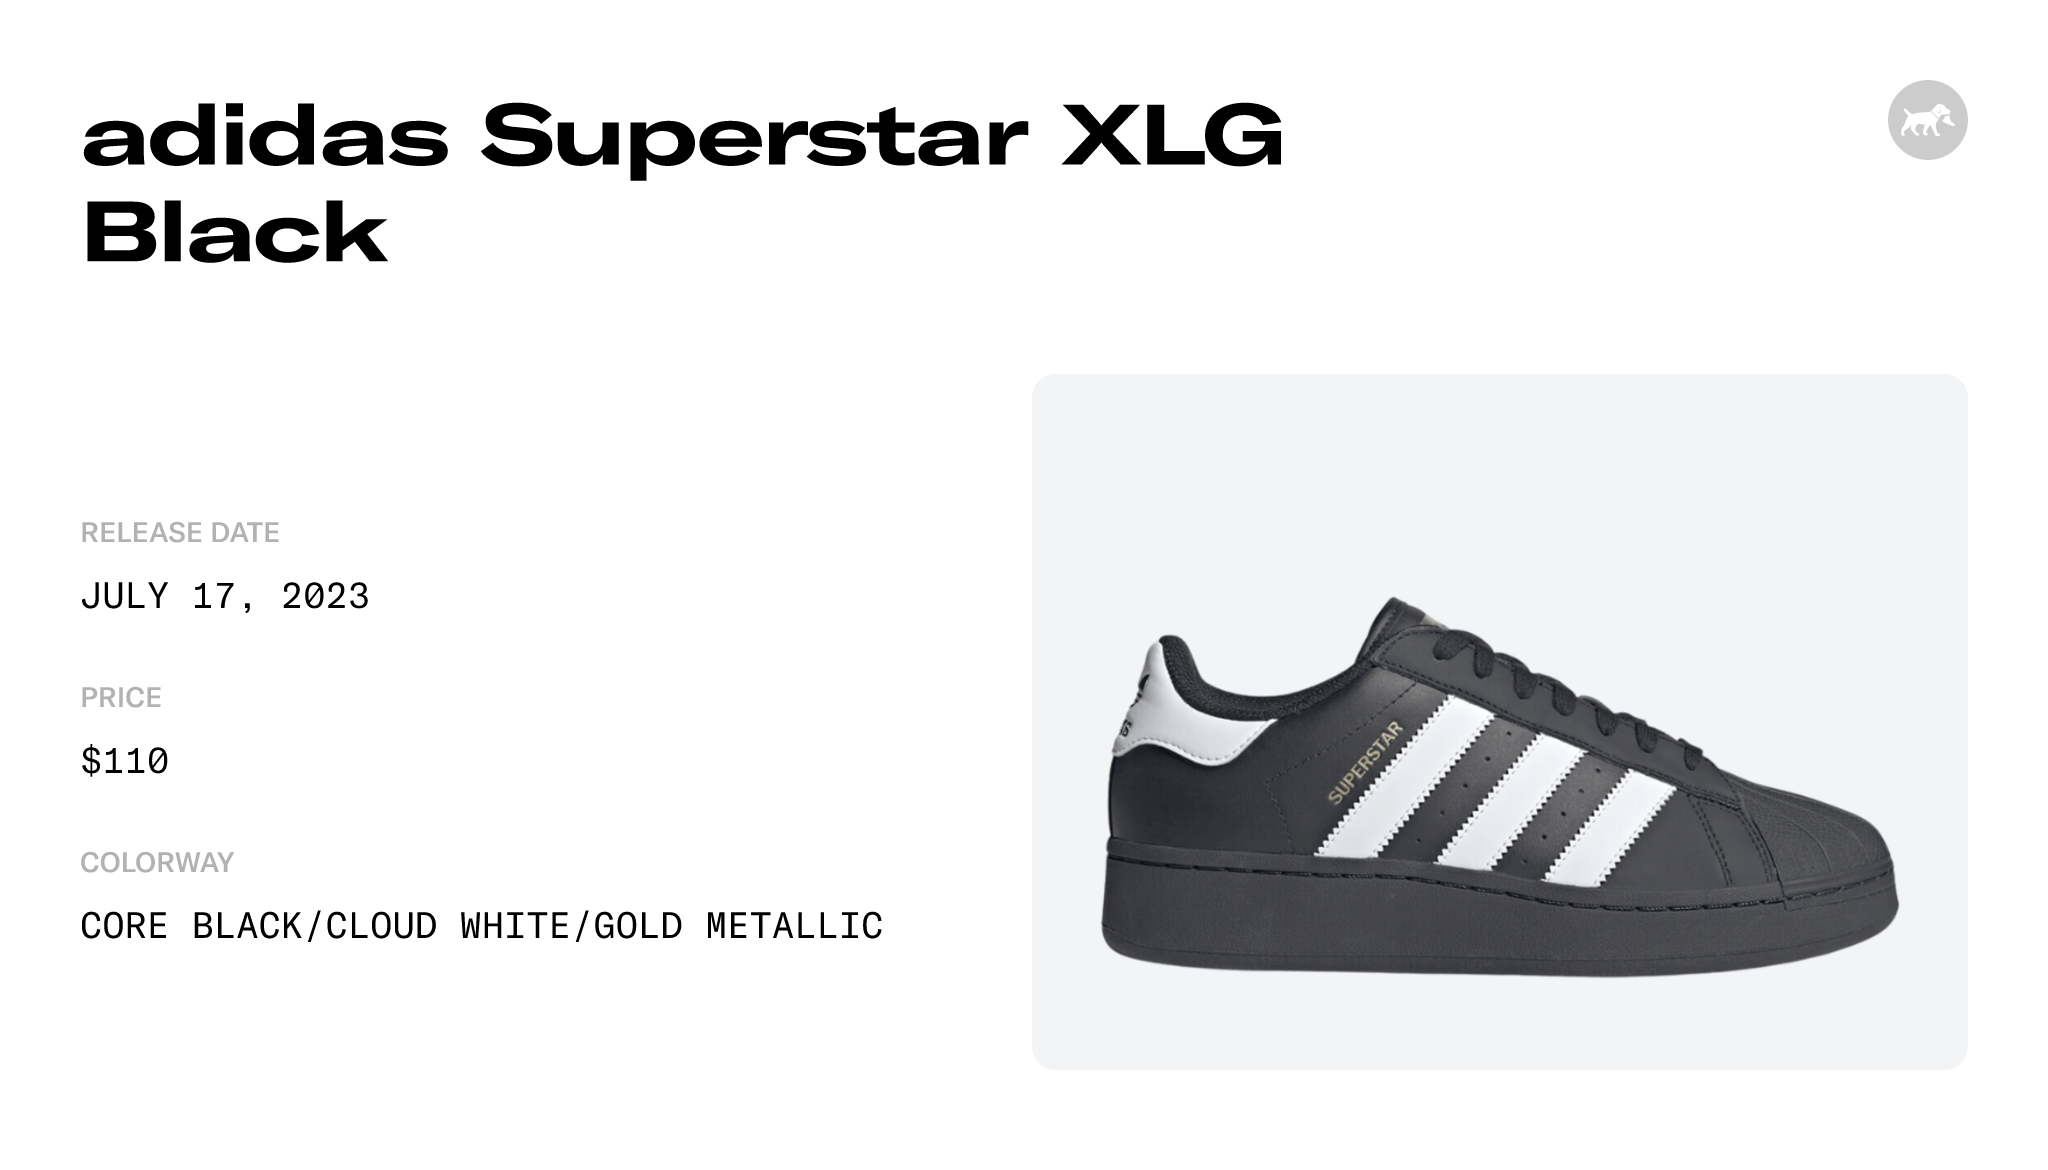 adidas Superstar XLG Black - IG9777 Raffles and Release Date